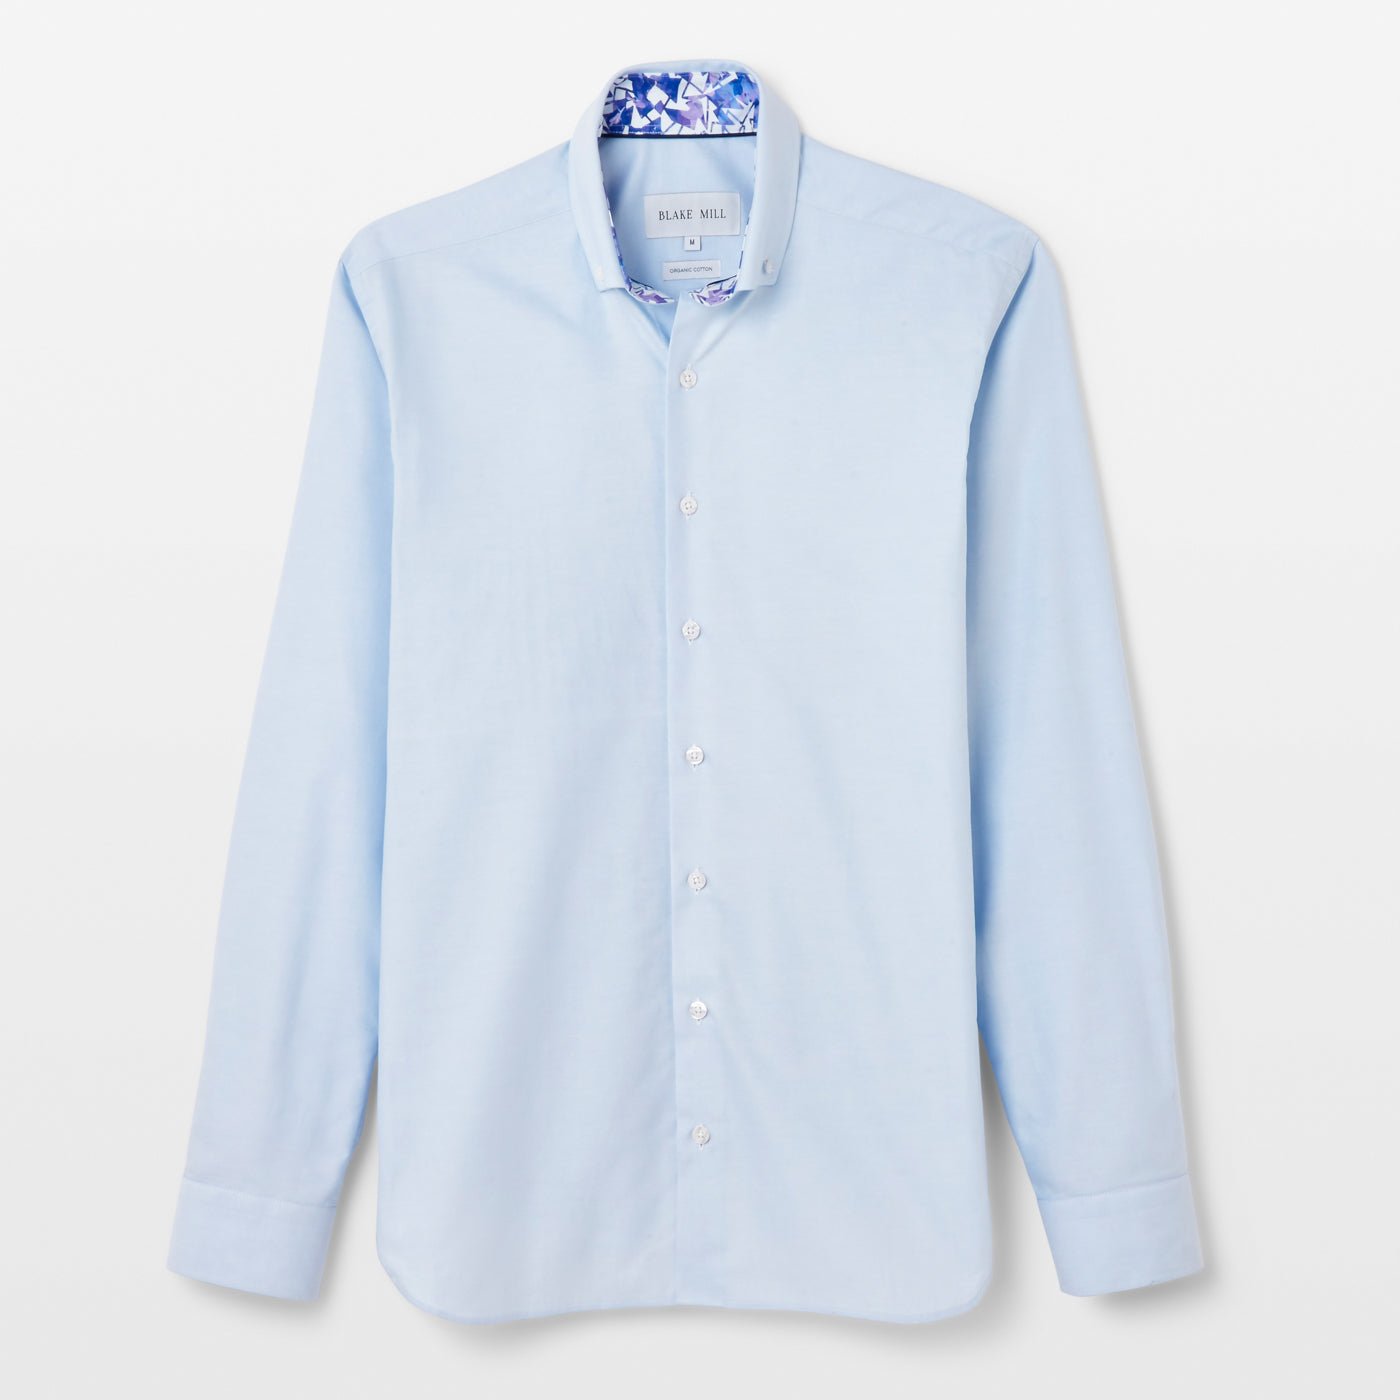 Blue Oxford with Shattered Shards Accents Button-Down Shirt - Blake Mill